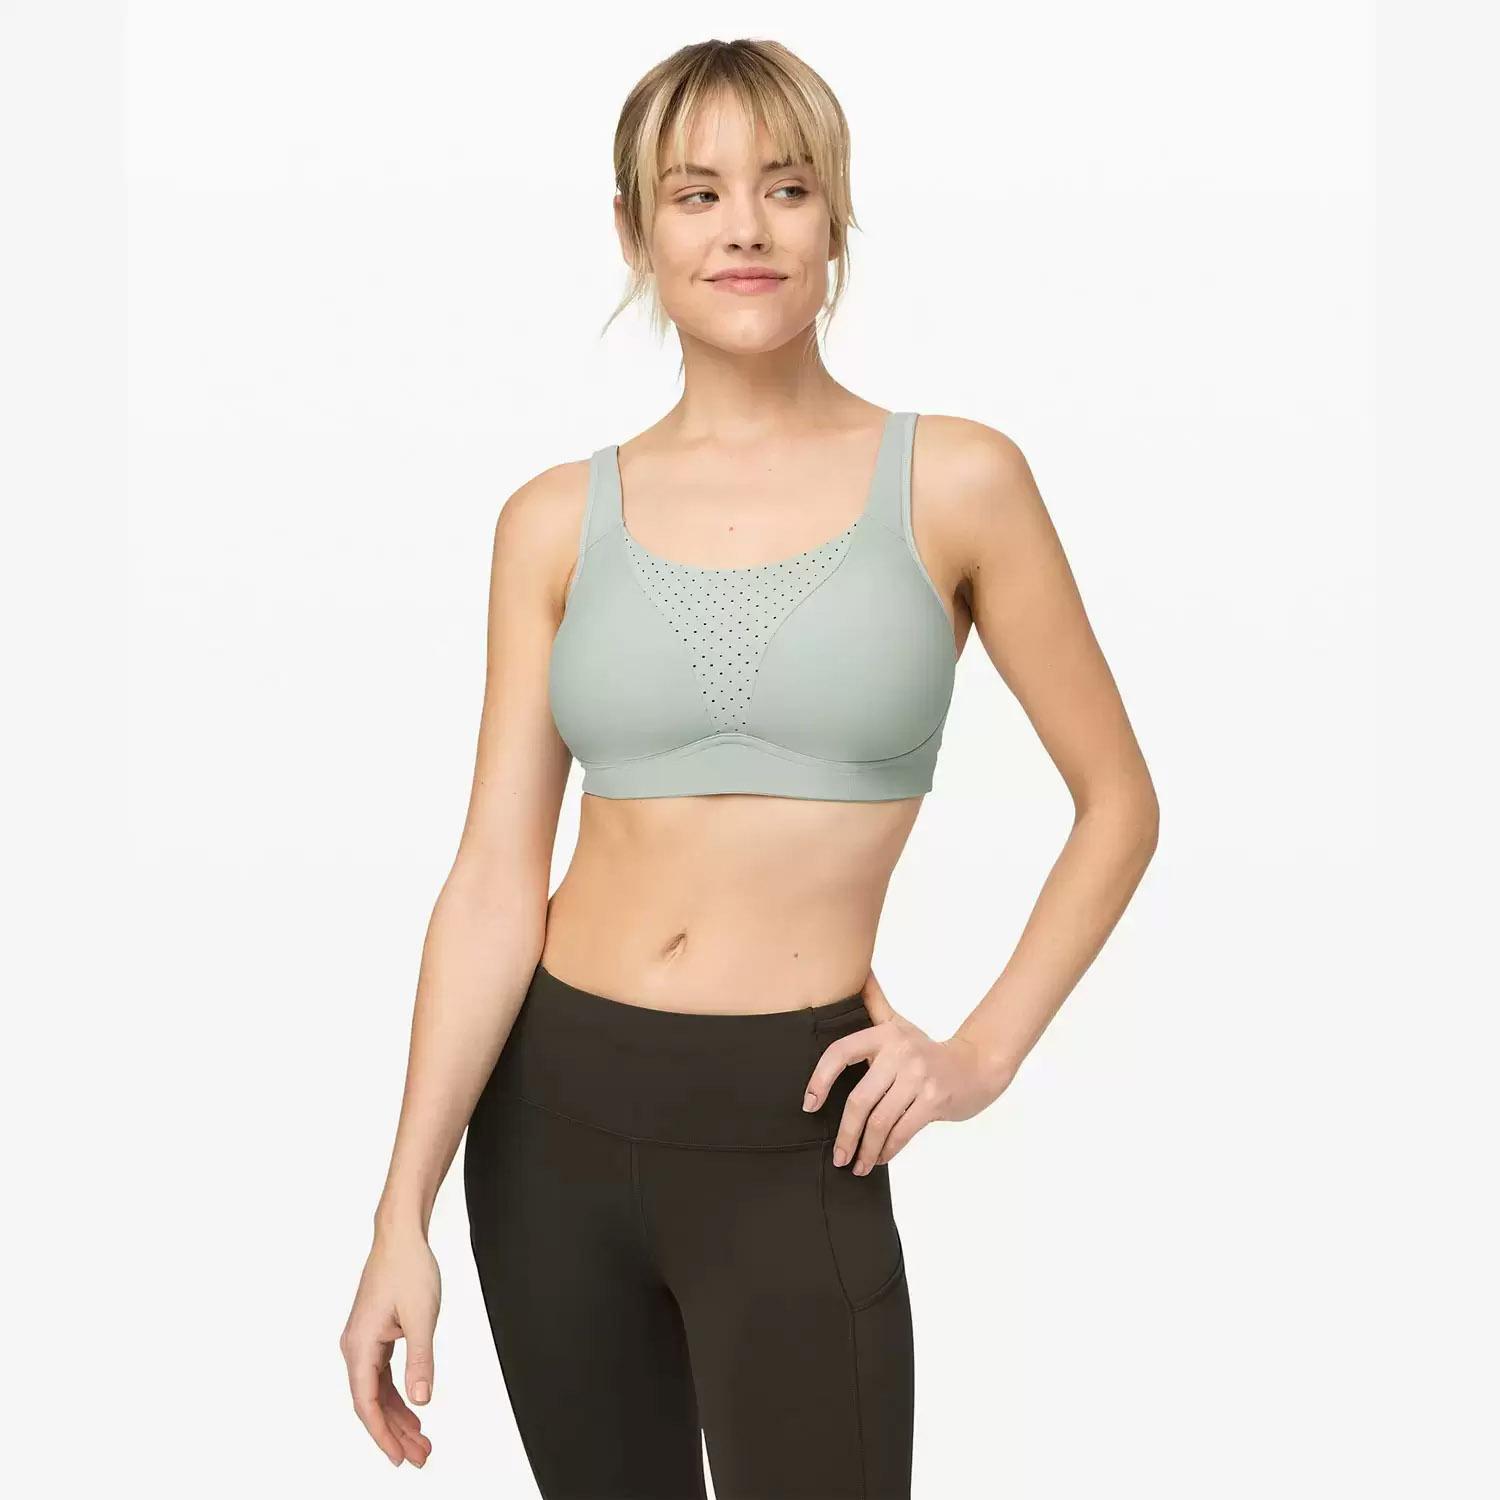 Lululemon Sale 50% Off with Free Shipping